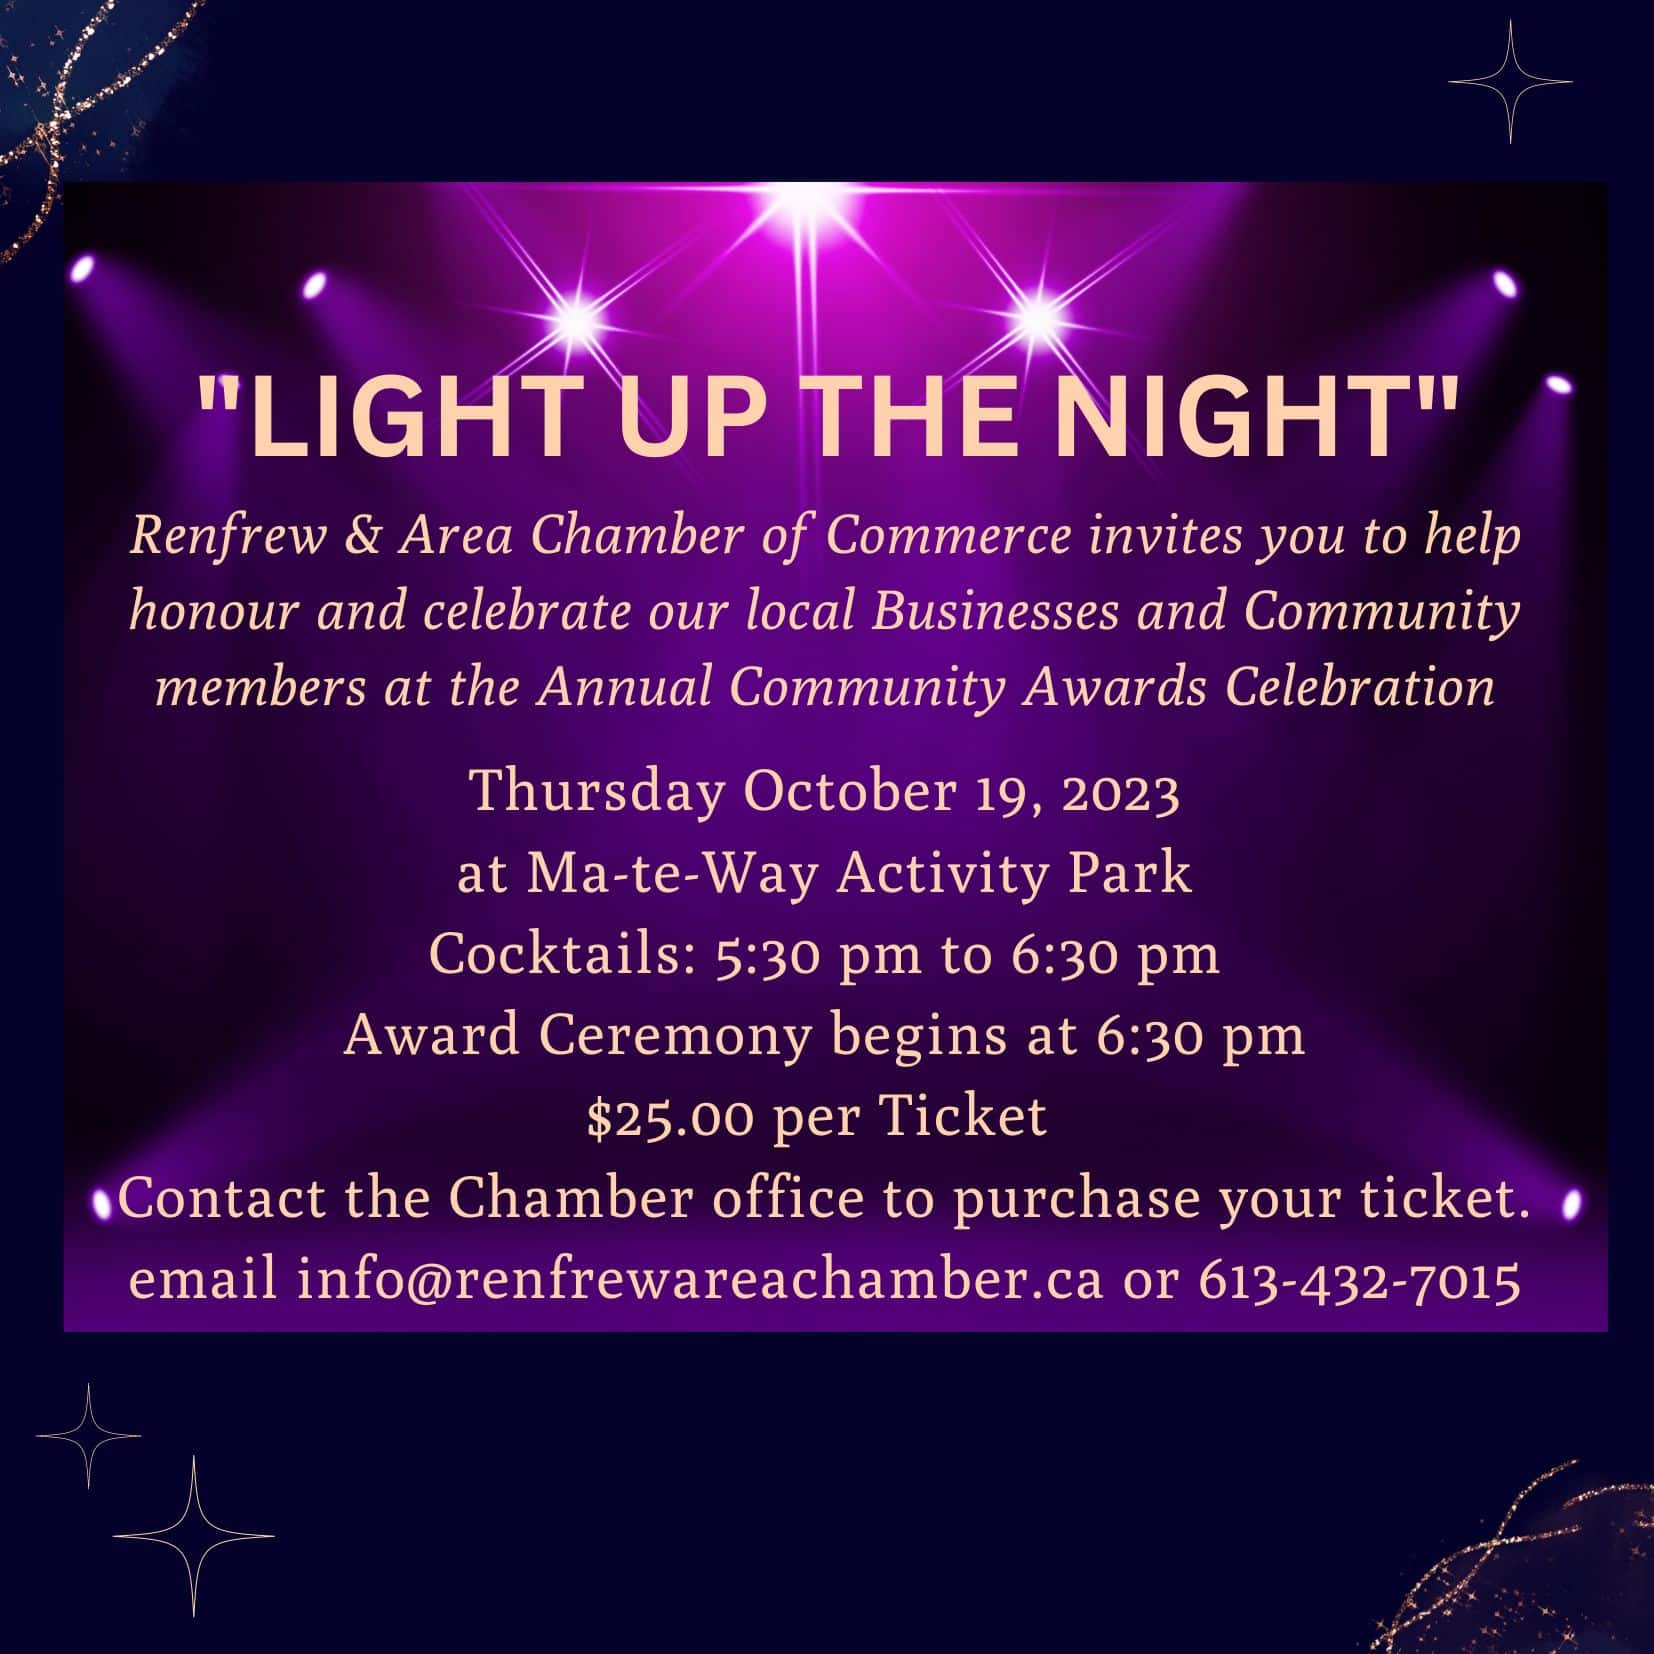 Thursday October 19, 2023 for the Annual Community Awards Celebration. Cocktails 5:30 pm., awards begins at 6:30 p.m. Reserve your tickets by following the link. http://events.constantcontact.com/register/event?llr=fulhfytab&oeidk=a07ek0fa8ko30f5b8df